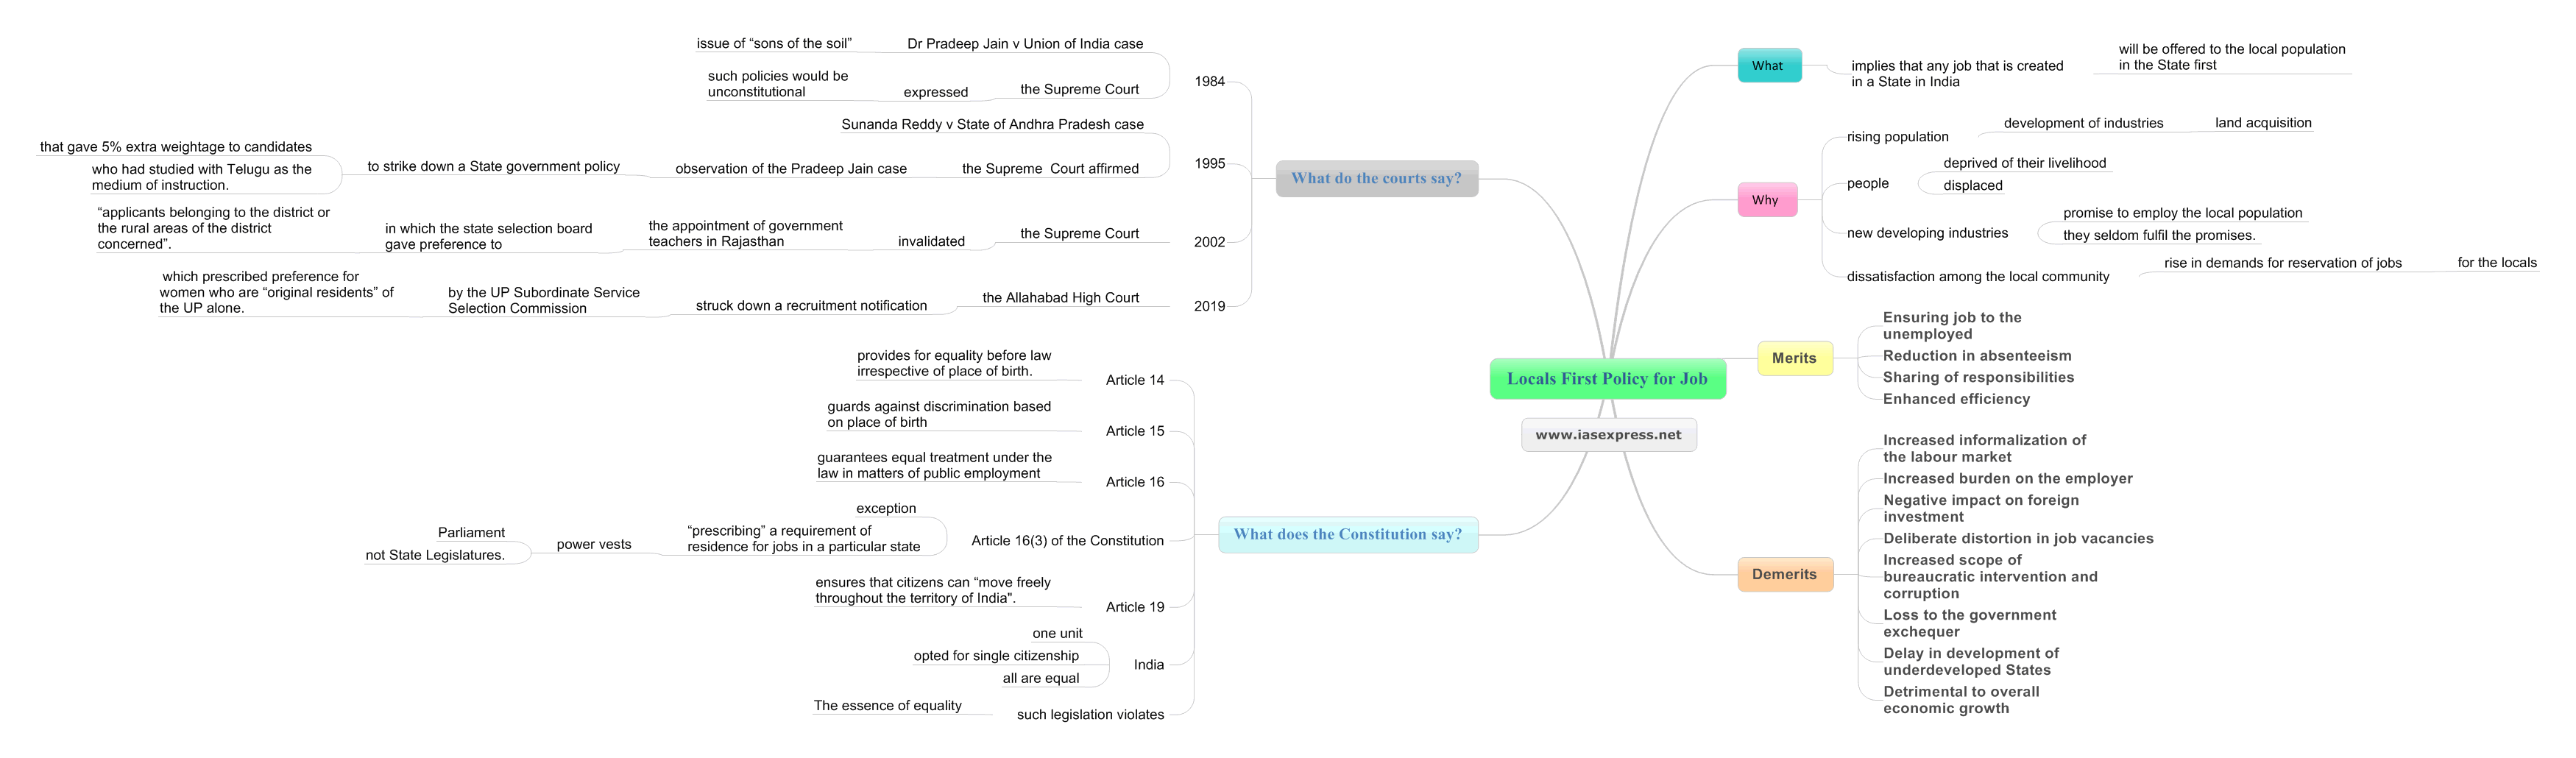 Locals First Policy for Job mindmap